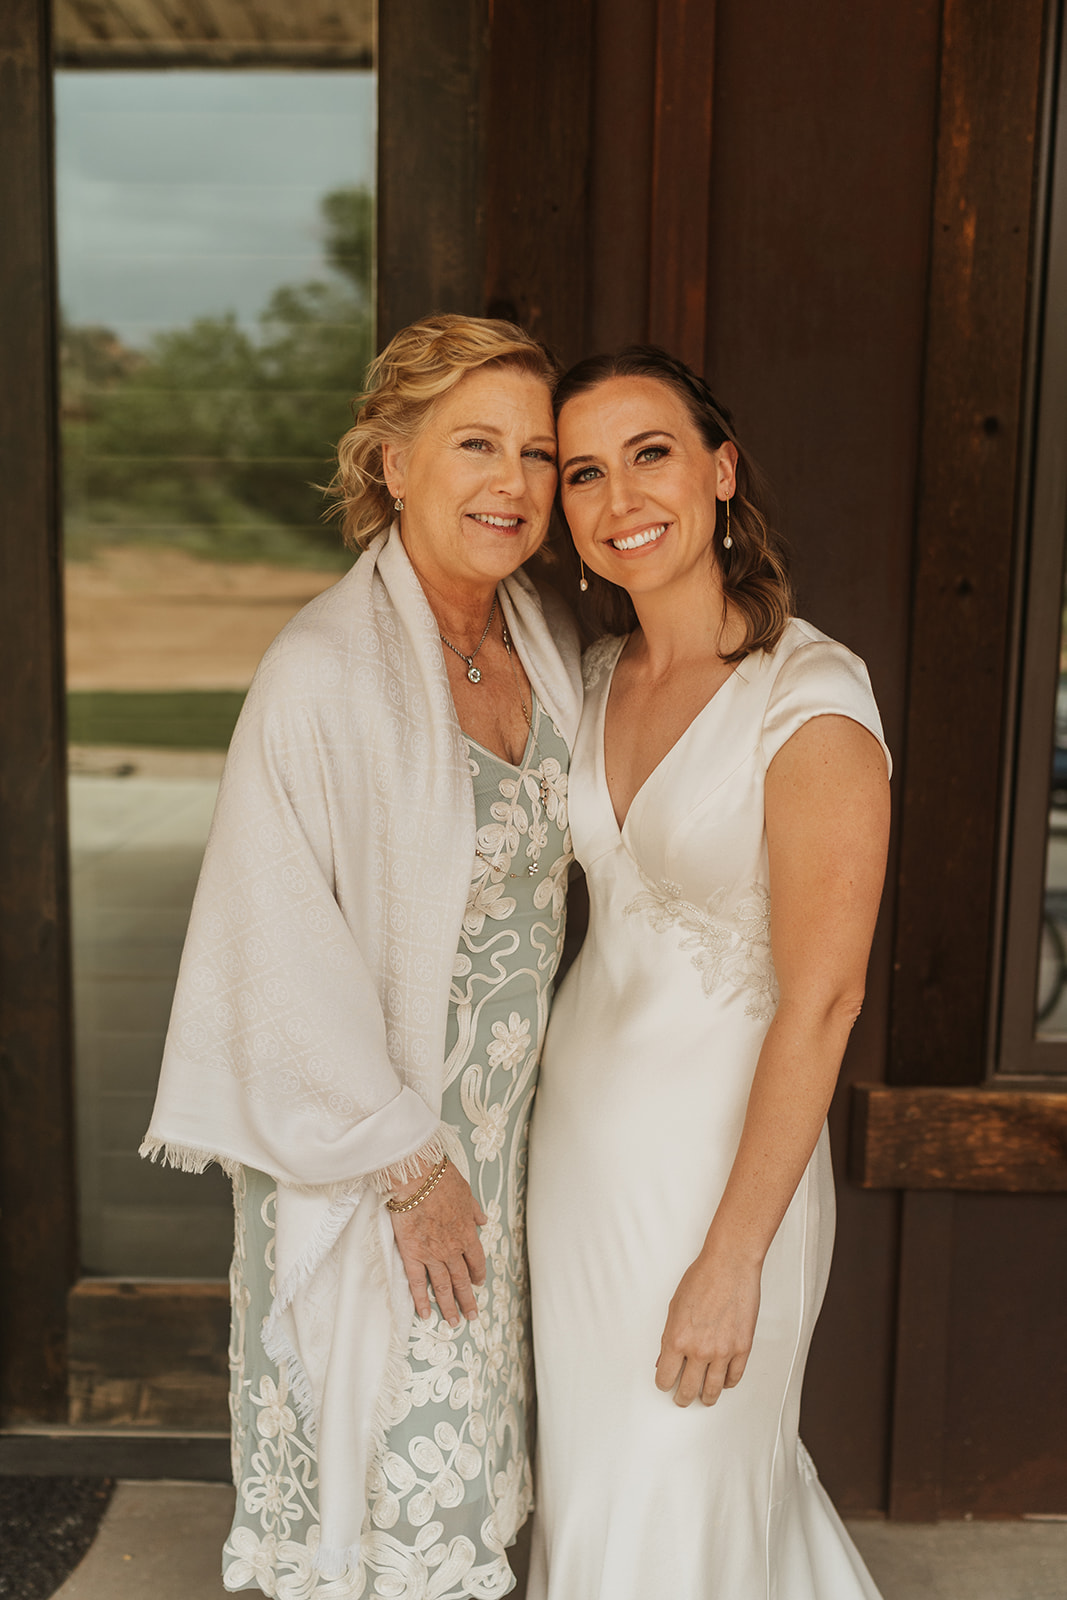 Mother her daughter, the bride, standing next to one another with a wooden wall behind them 